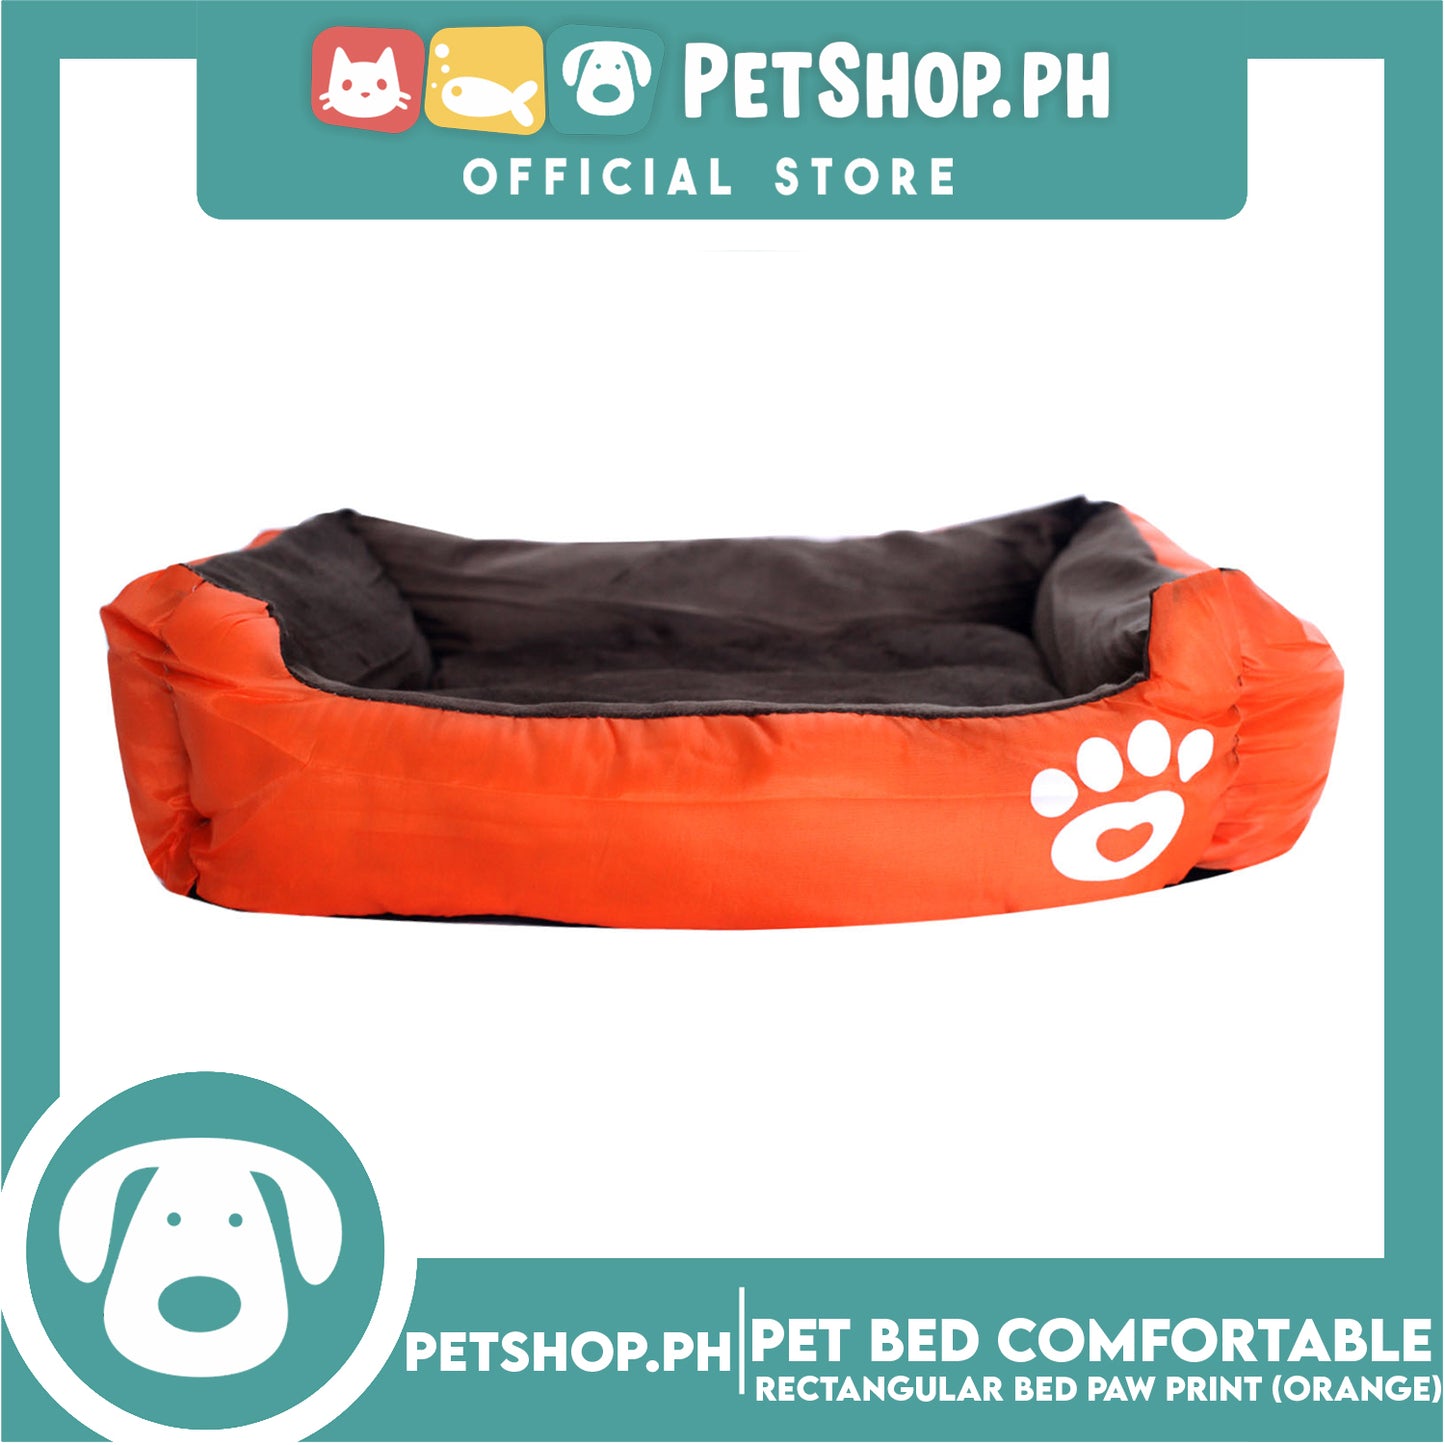 Pet Bed Comfortable Rectangular Pet Bed with Paw Print 72x58x10cm Large for Dogs & Cats (Orange)